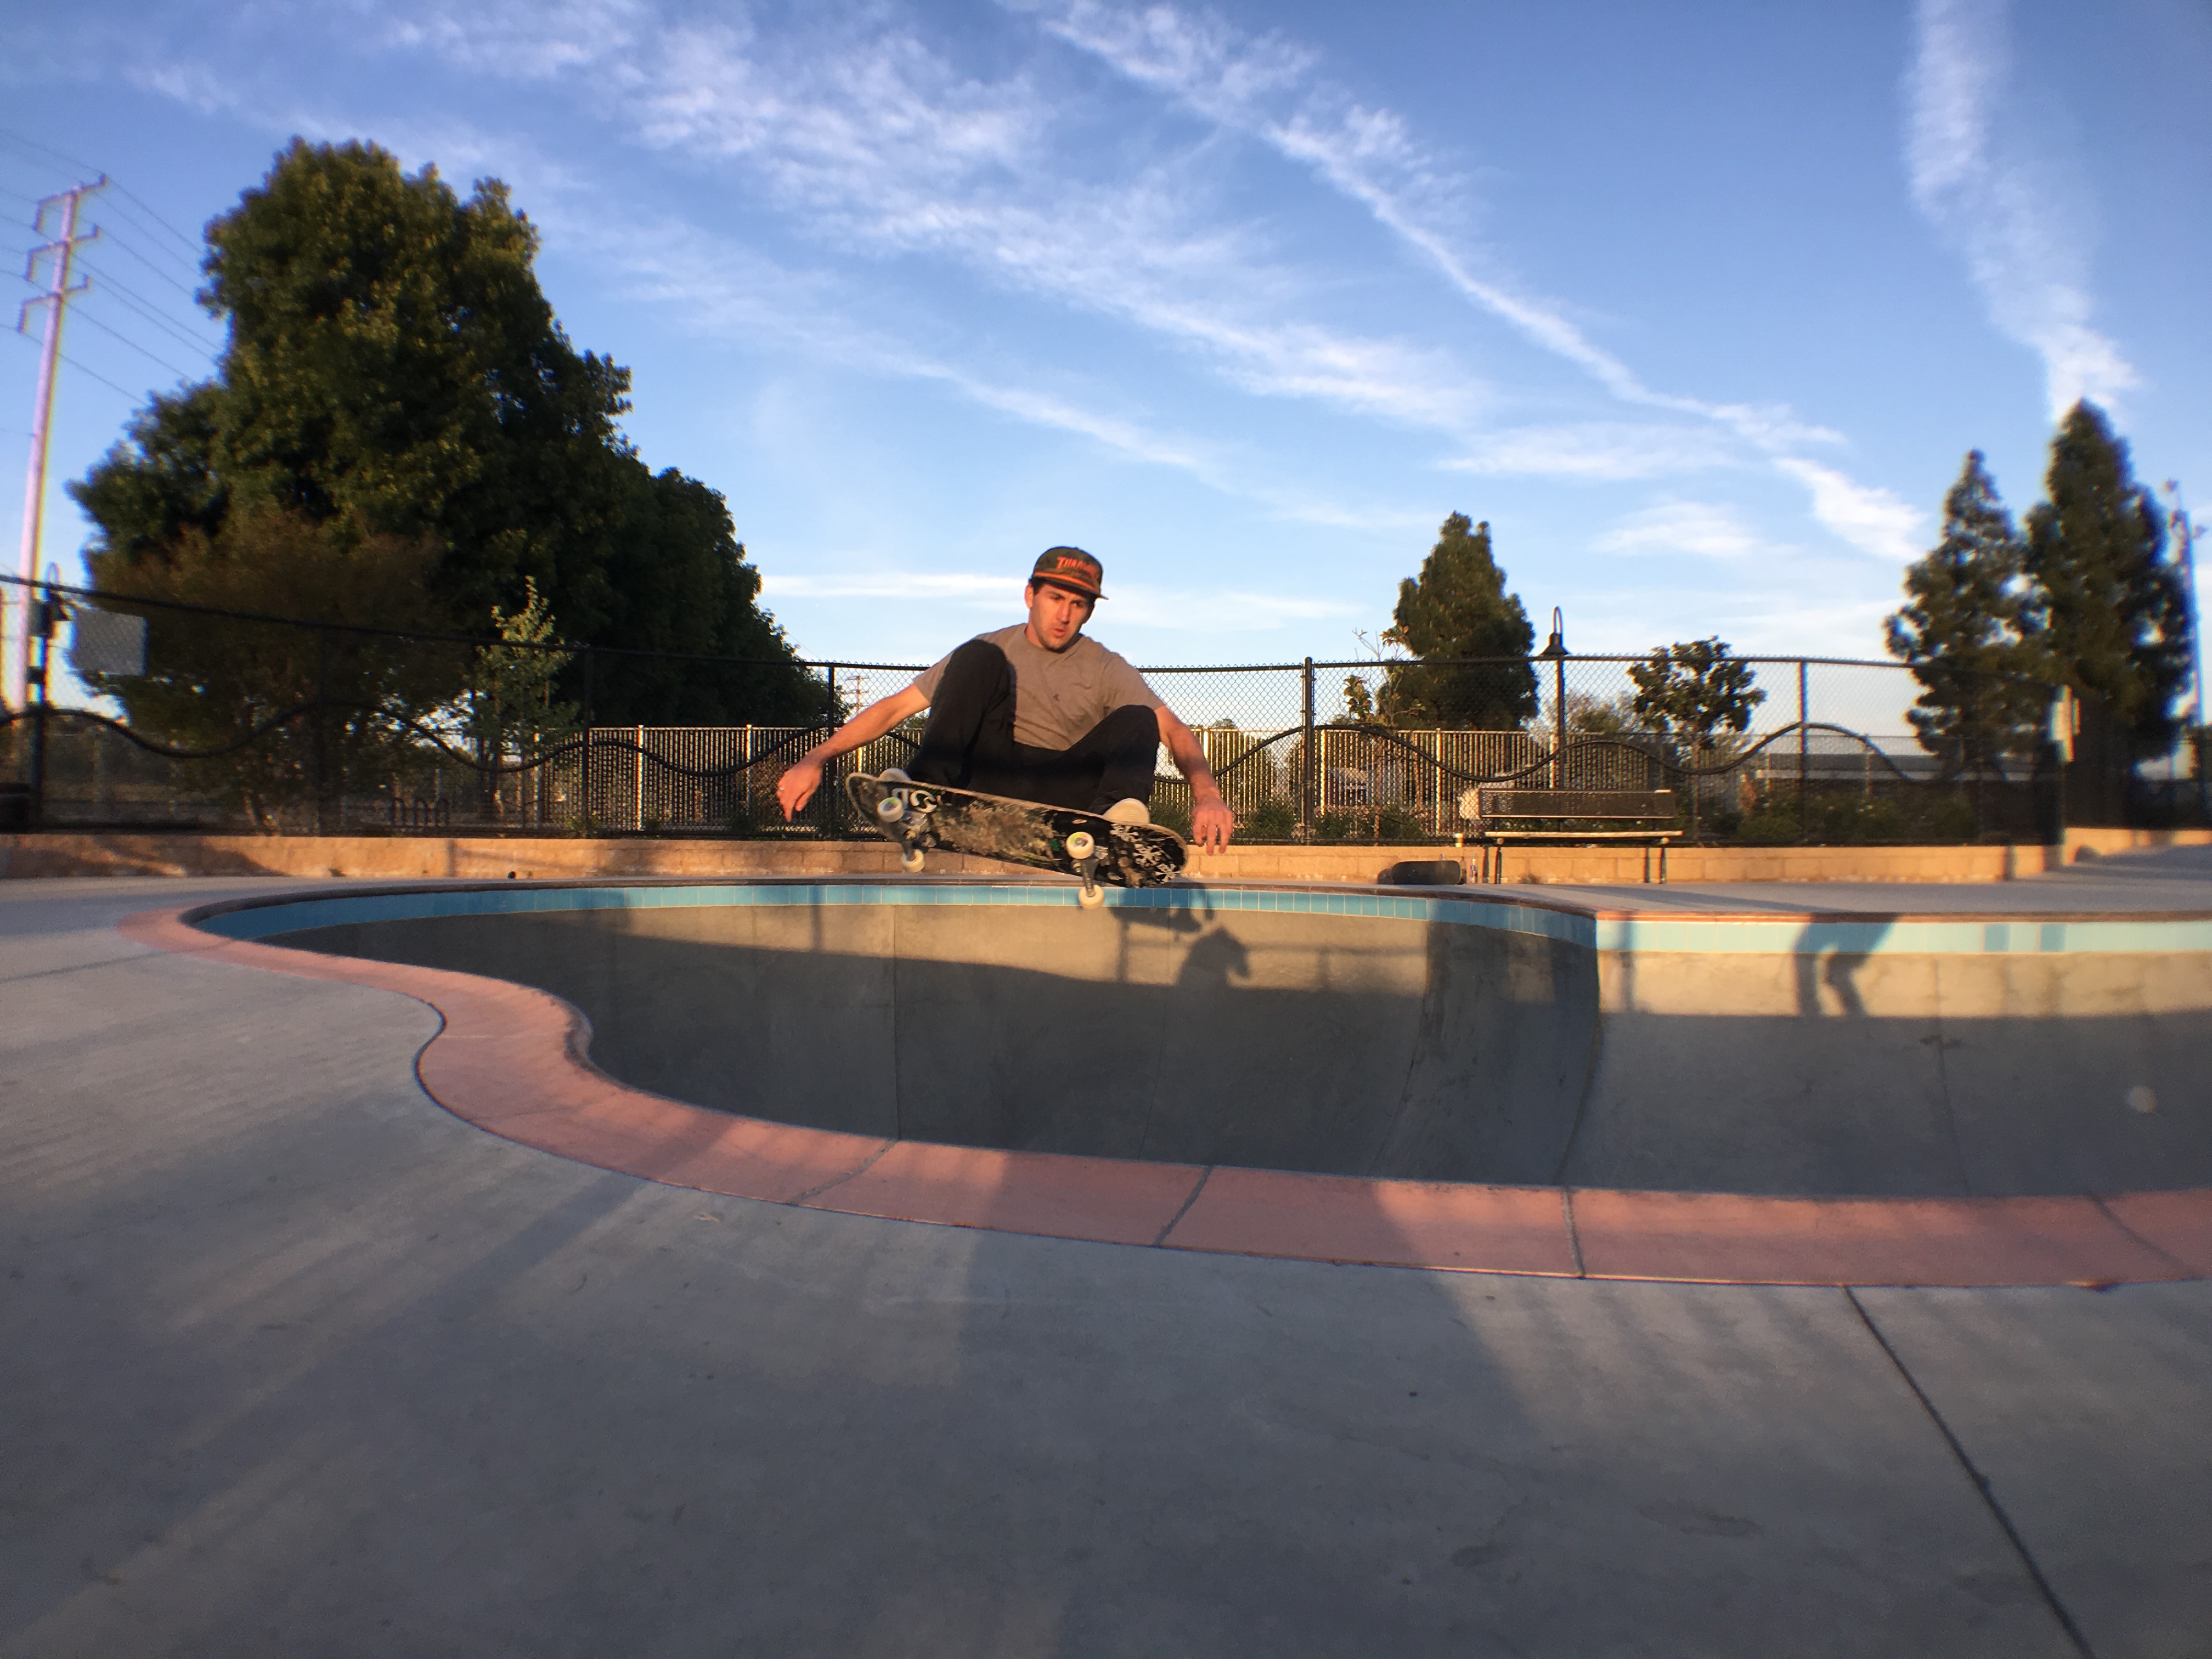 Brad mccain shred this pool so hard, you dont even know. Frontside ollie. 